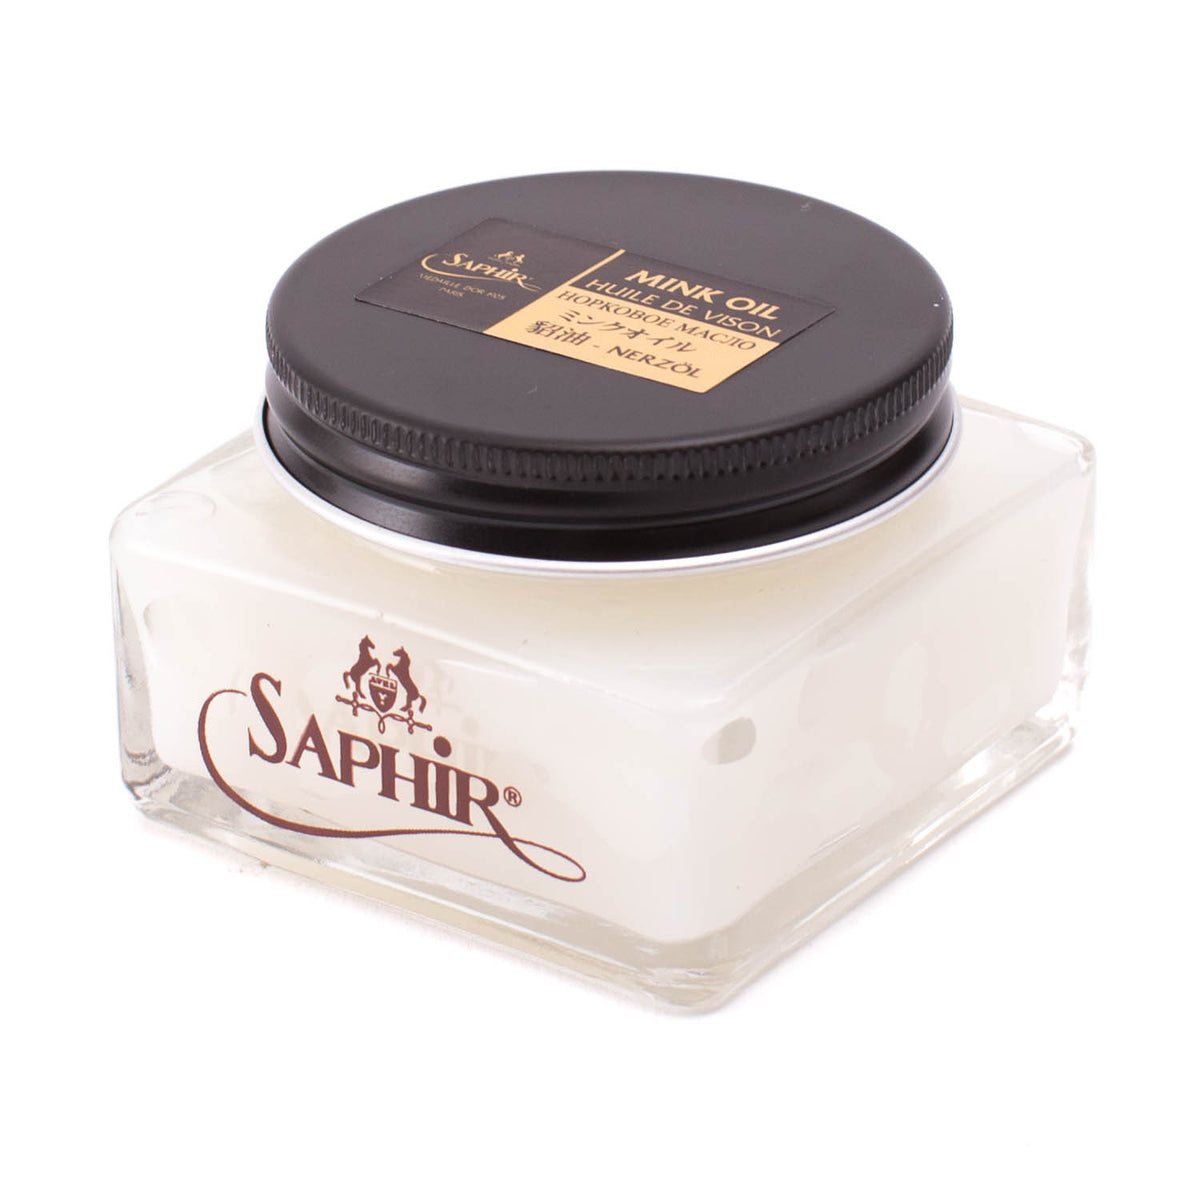 A jar of KirbyAllison.com Saphir Medaille d'Or Mink Oil, providing deep nourishment to smooth leather surfaces, on a white background.